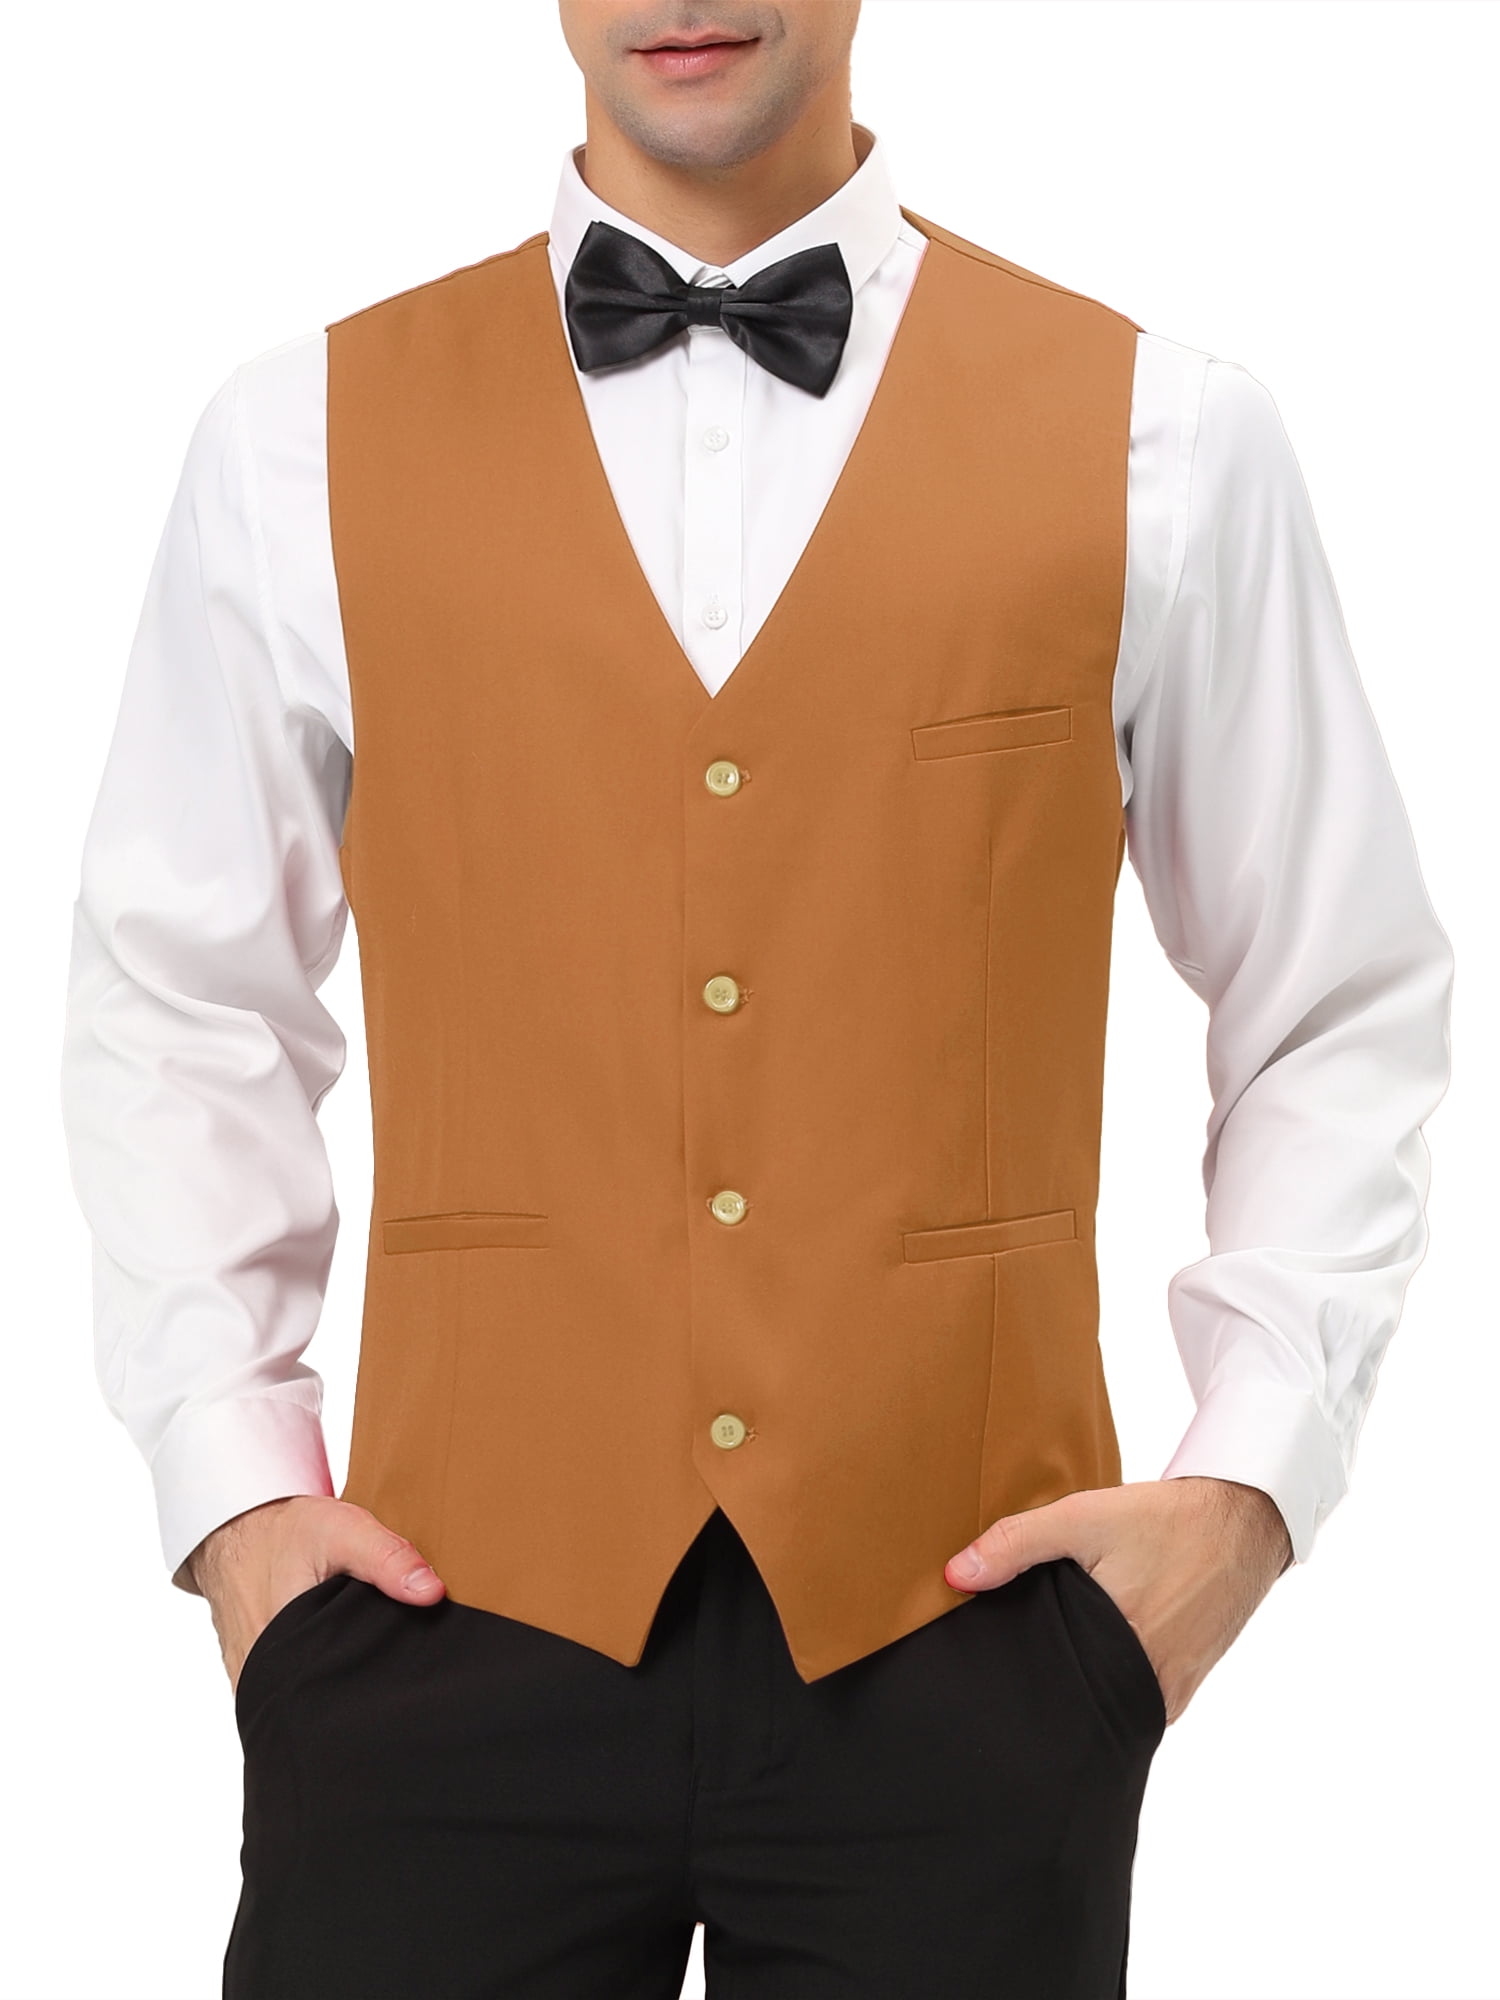 New Polyester formal Men's Tuxedo Vest Waistcoat & tie solid Red Prom 